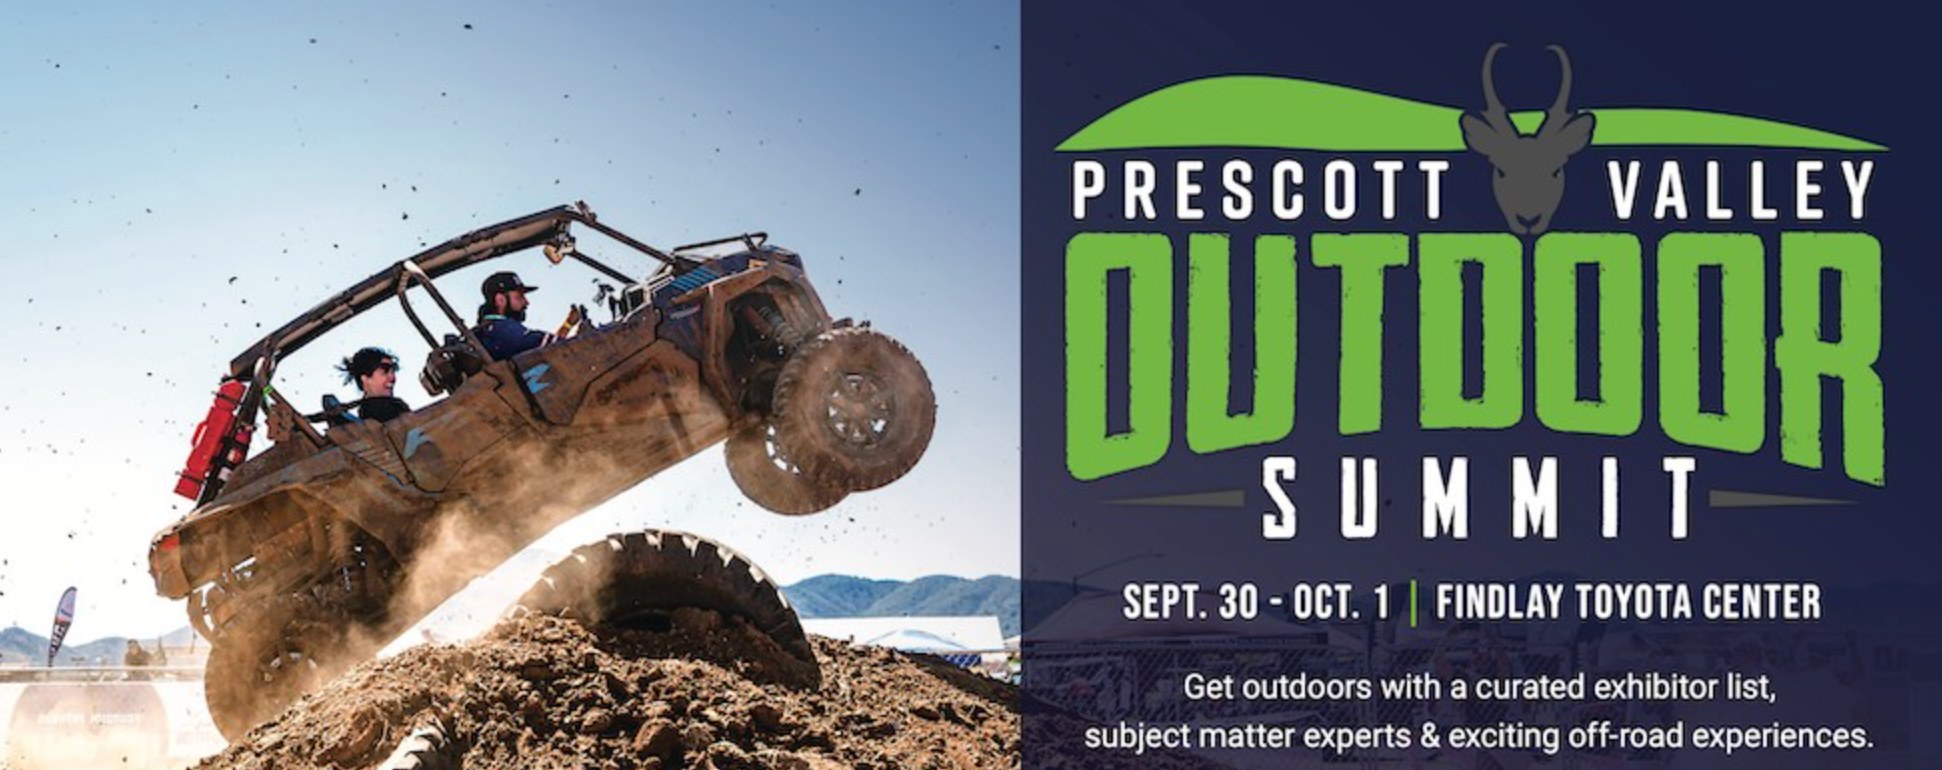 2023 Prescott Valley Outdoor Summit Announced by Fain Family Foundation